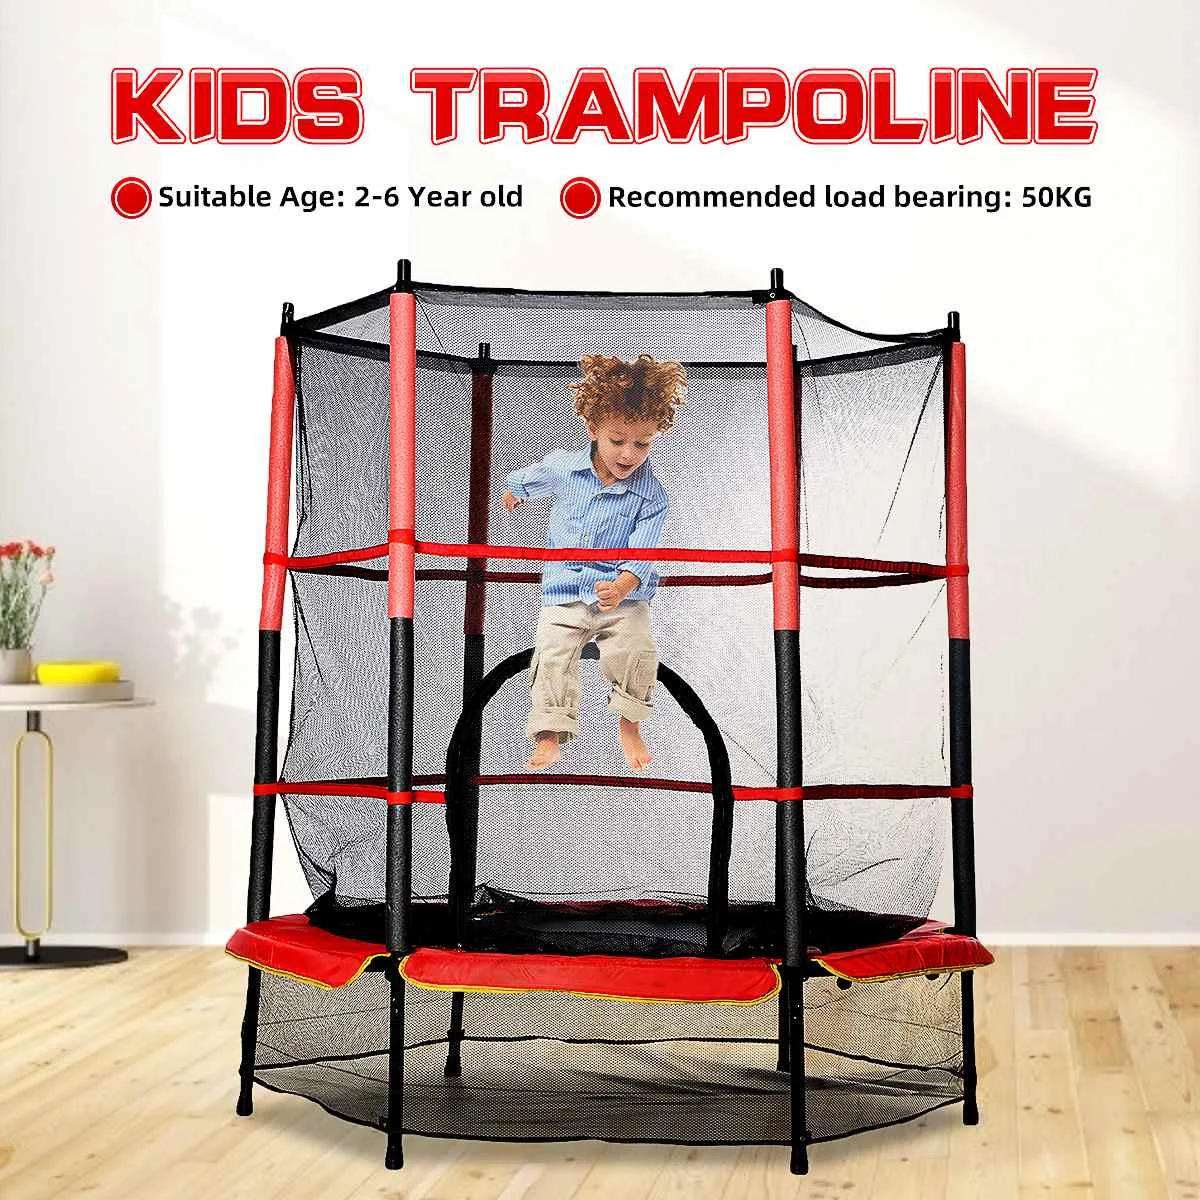 140cm Indoor Adult Children Trampoline with Protection Net Jumping Bed Outdoor Trampolines Workout Bed Home Fitness Equipment